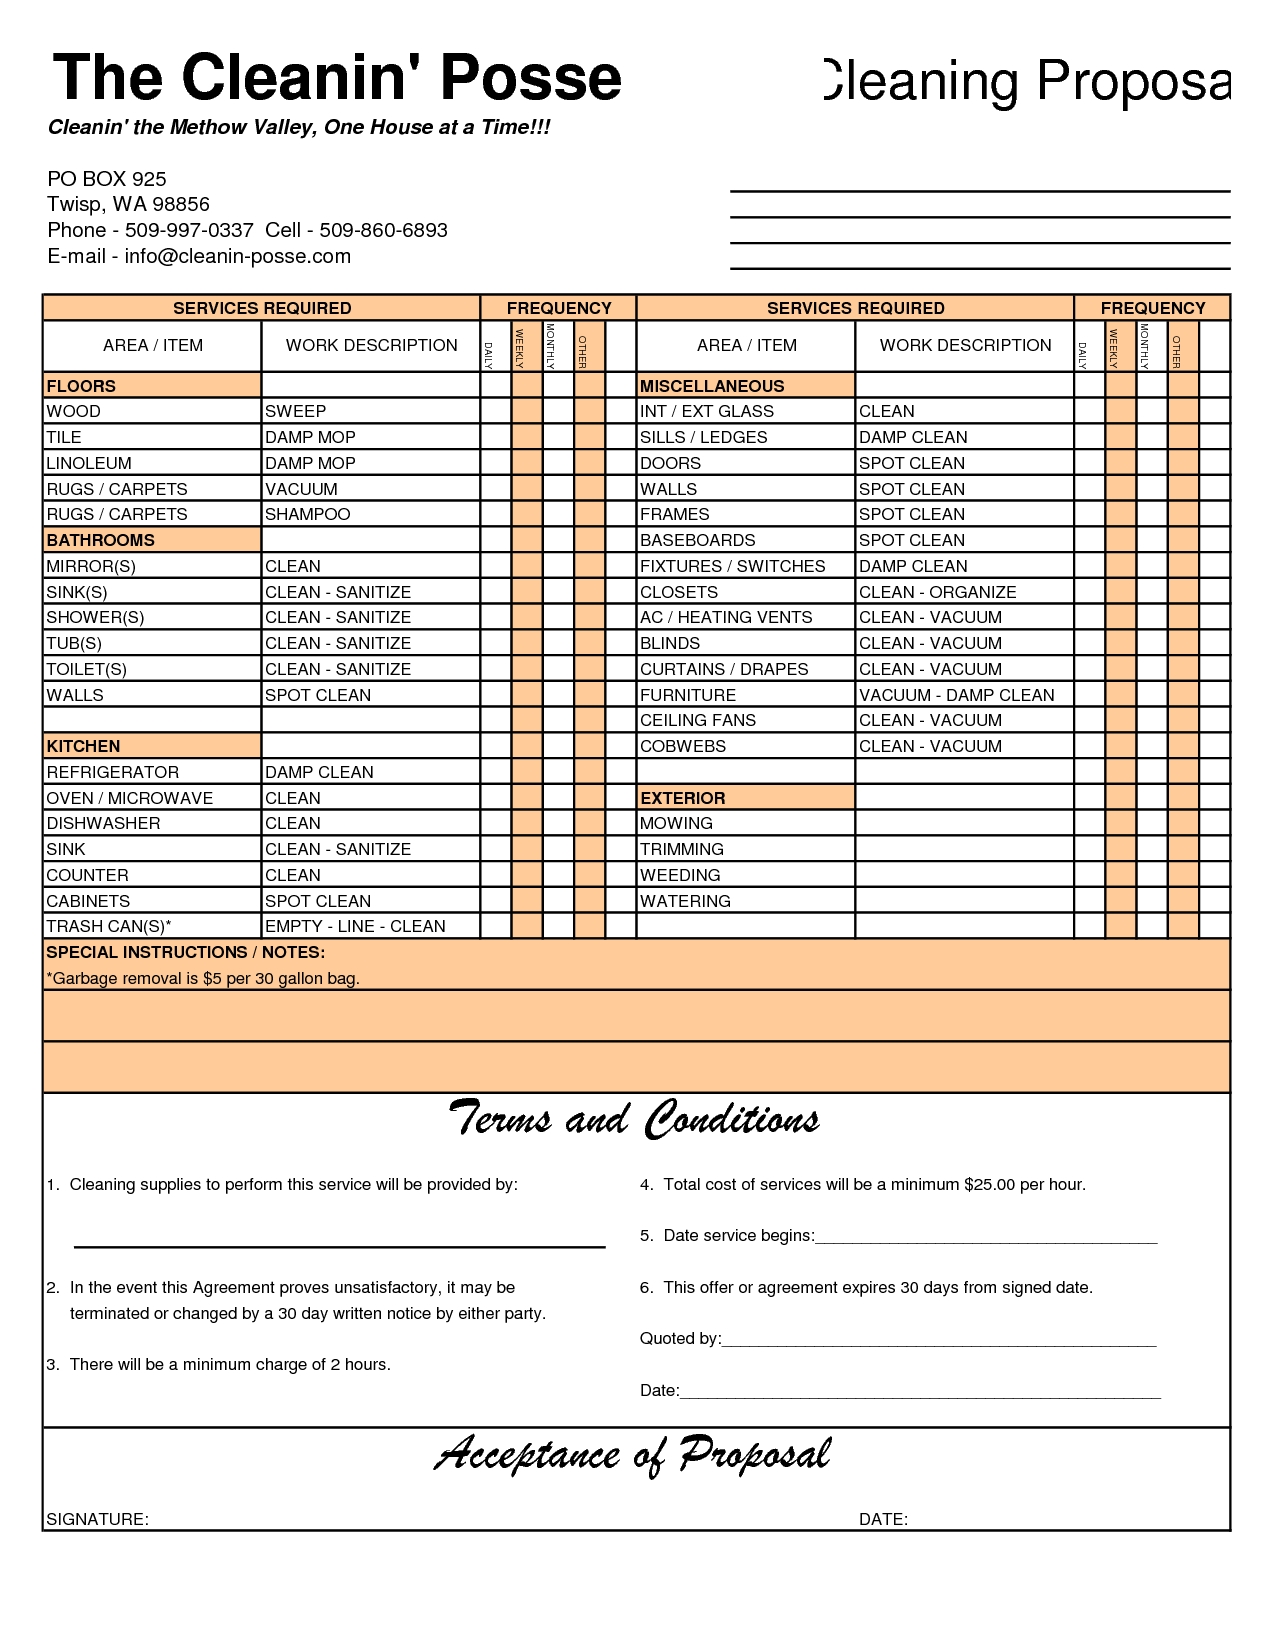 cleaning services invoice template free